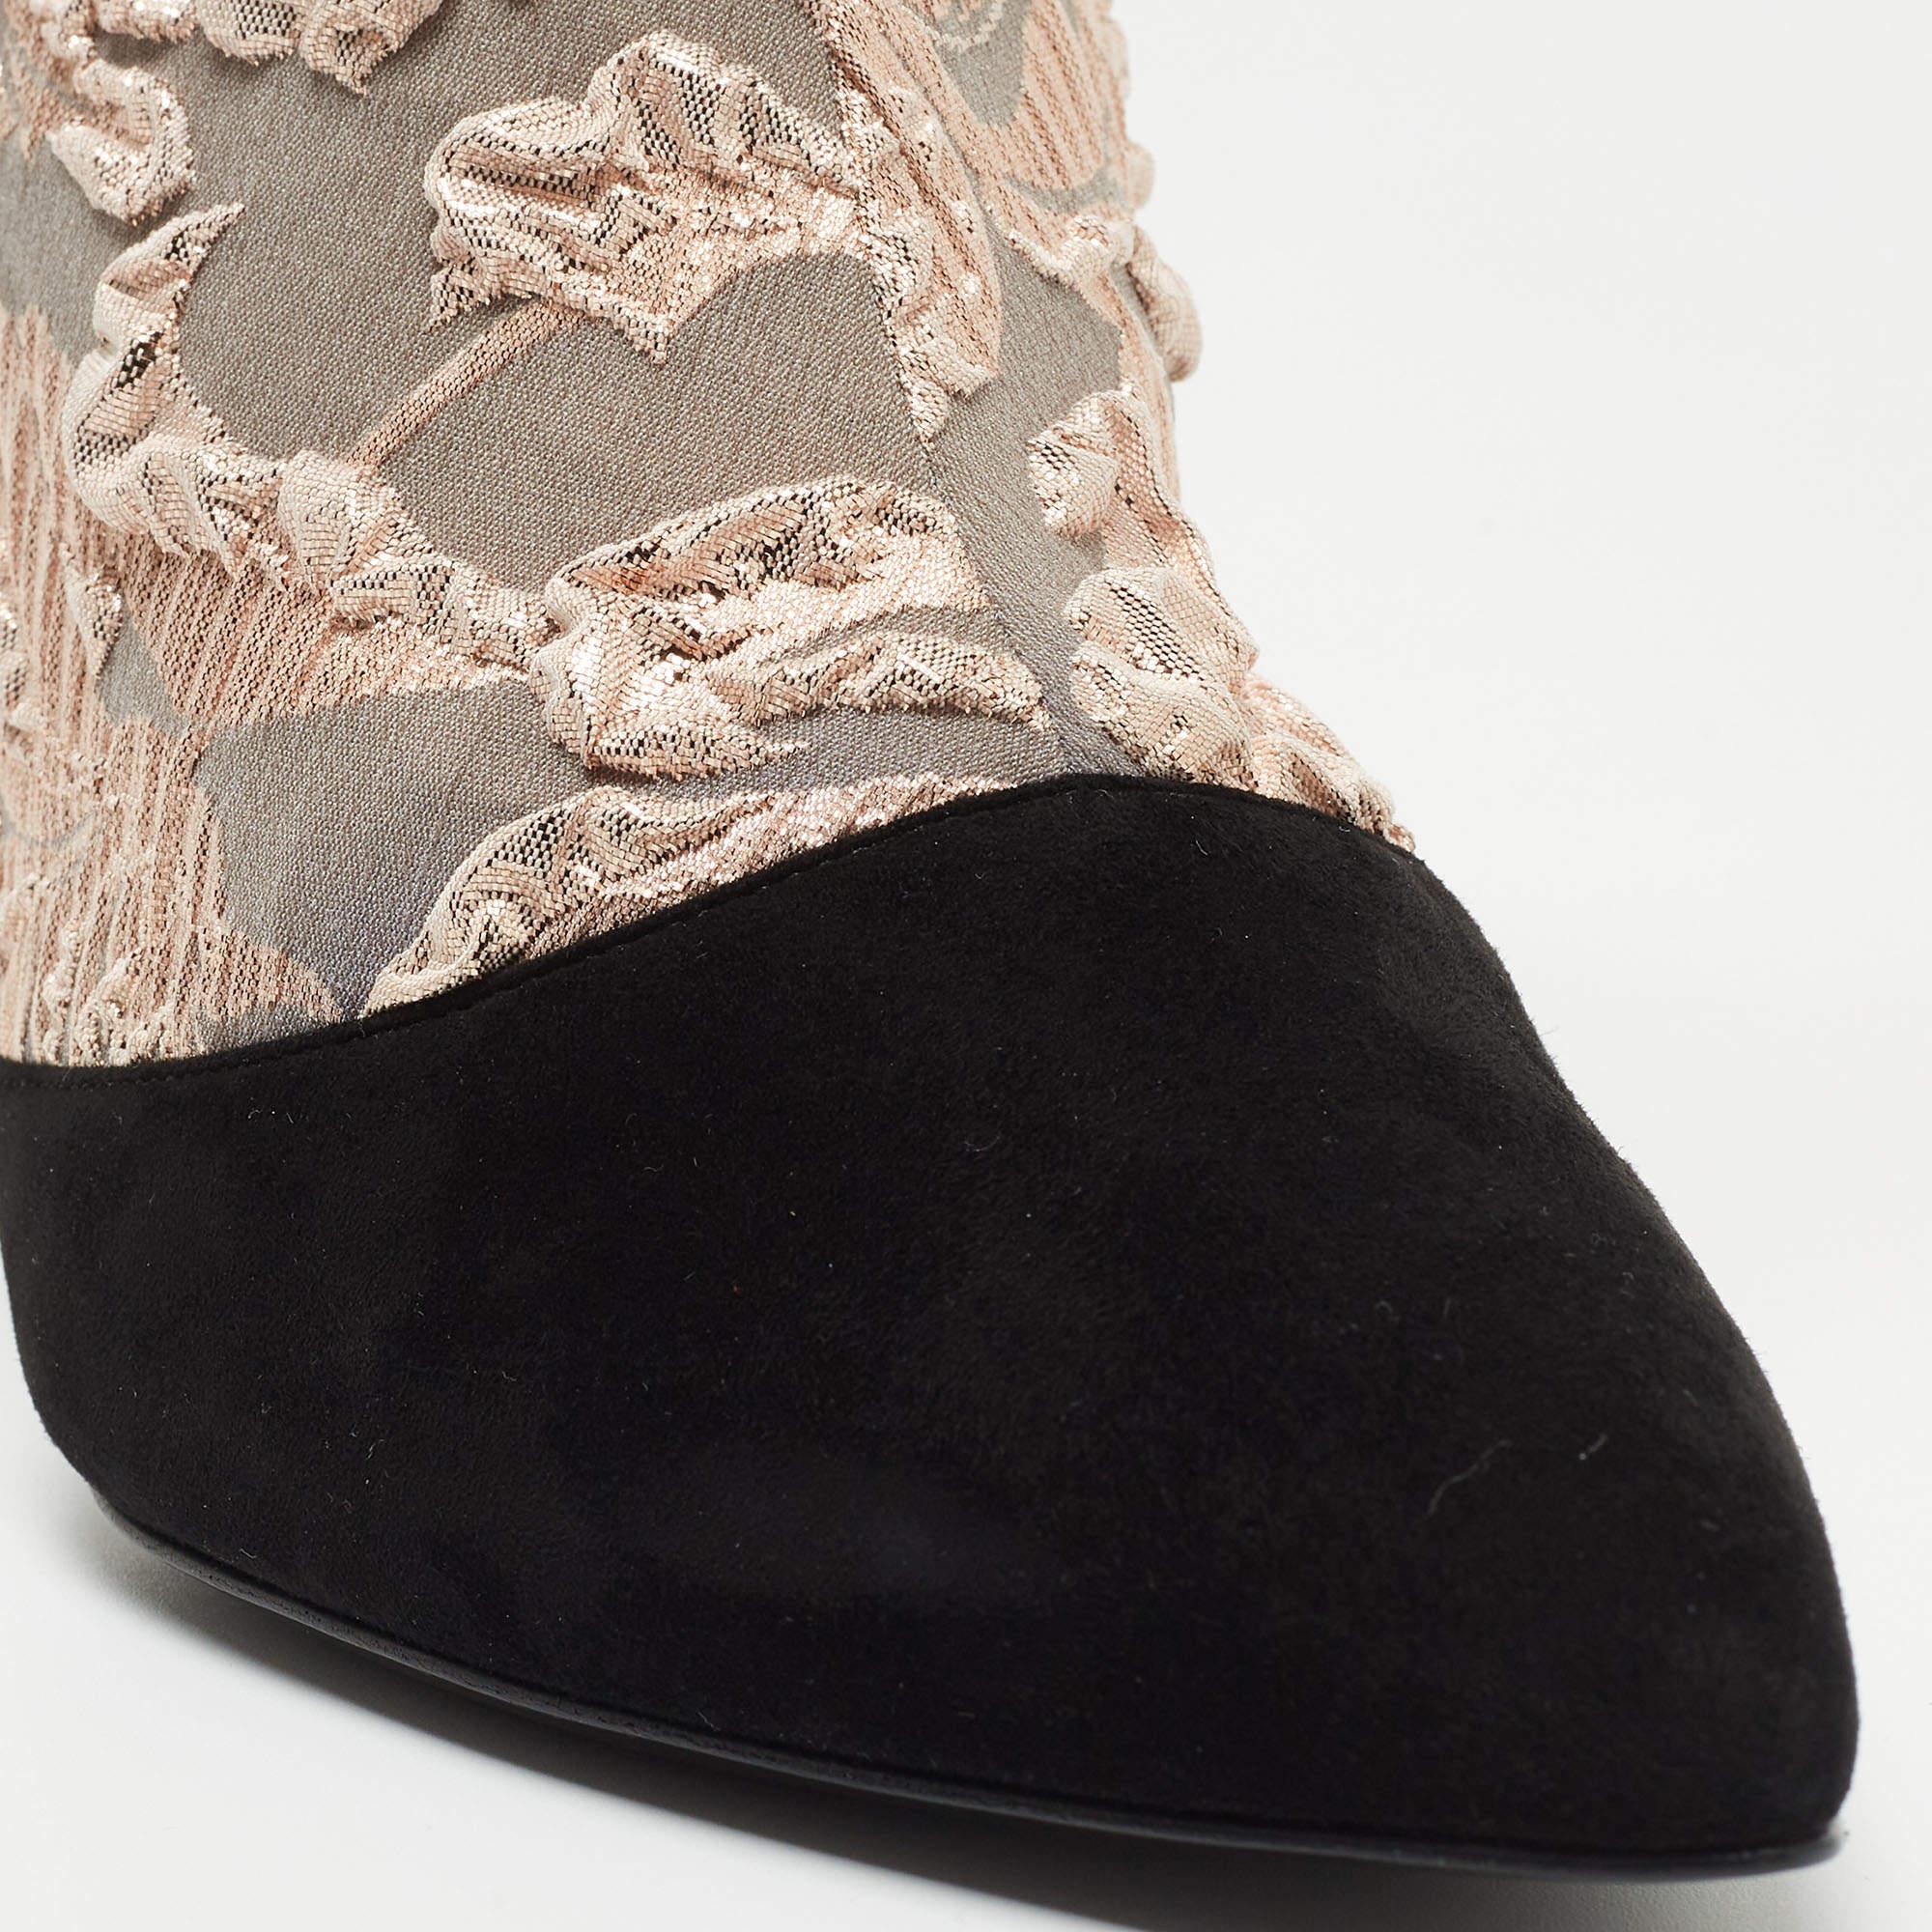 Pierre Hardy Black/Metallic Peach Fabric and Suede Dolly Pointed Toe Ankle Booti For Sale 5